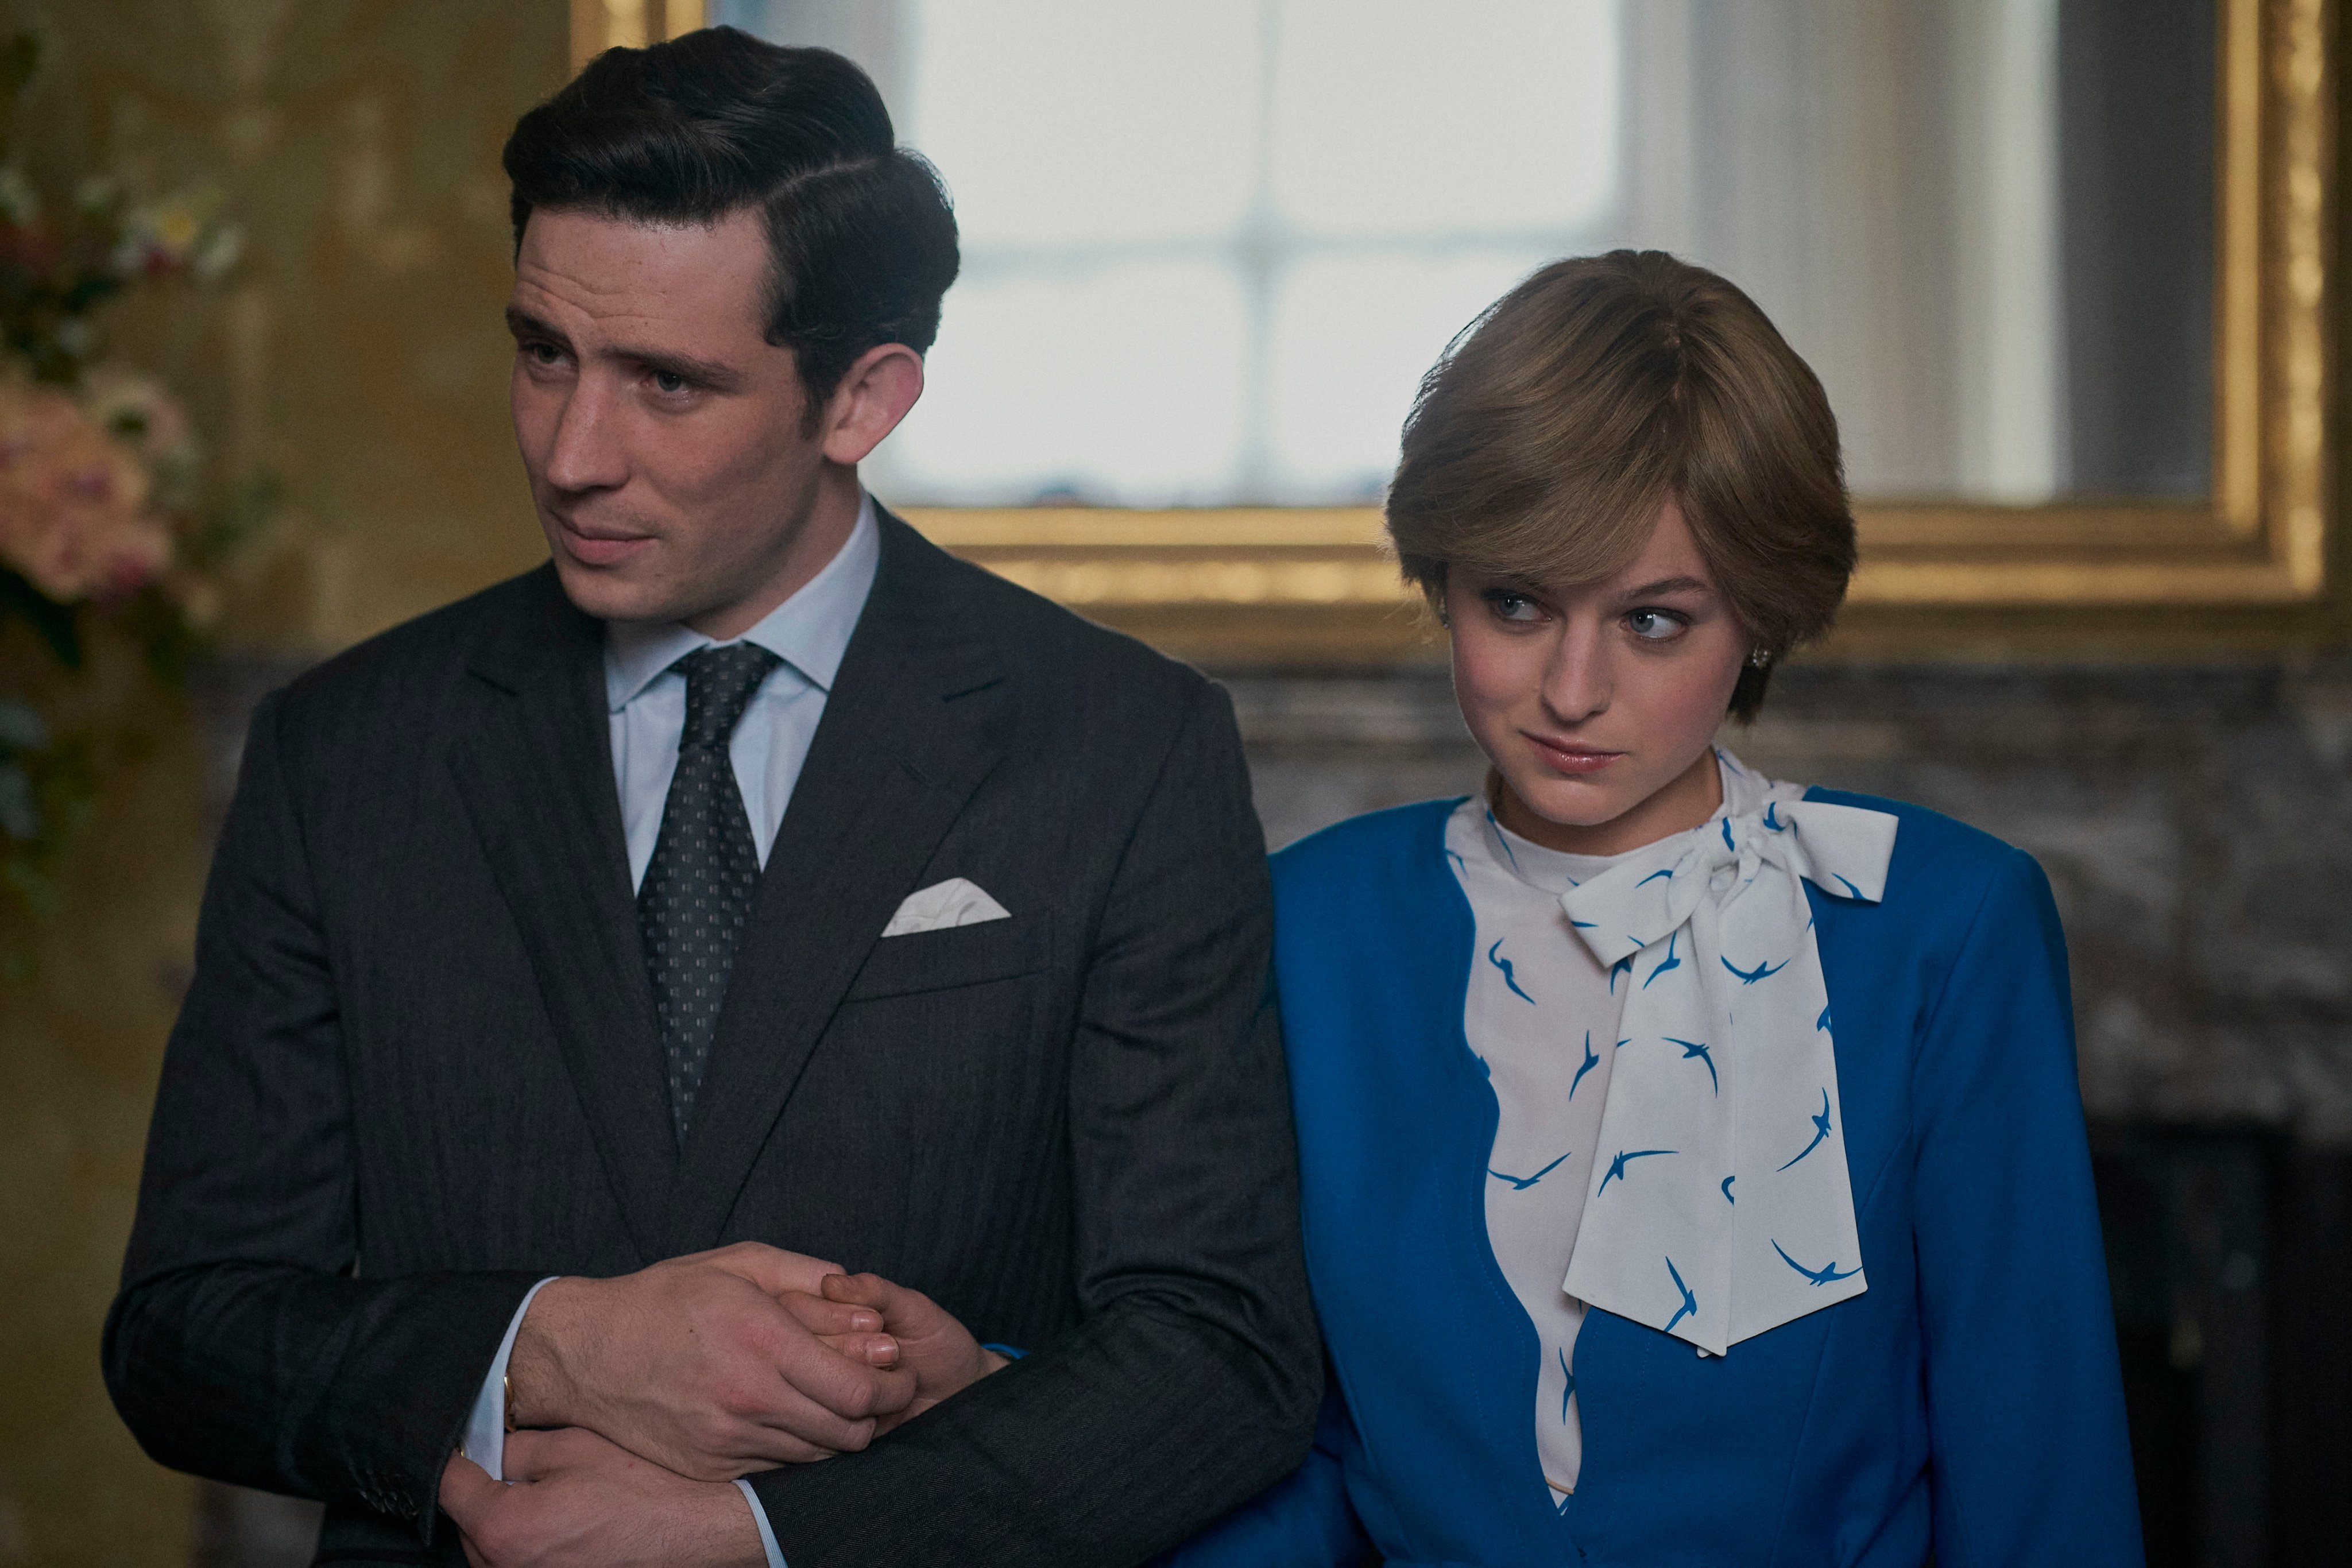 Netflix Just Ruthlessly Shut Down Calls Asking For A ‘Fiction’ Disclaimer On The Crown